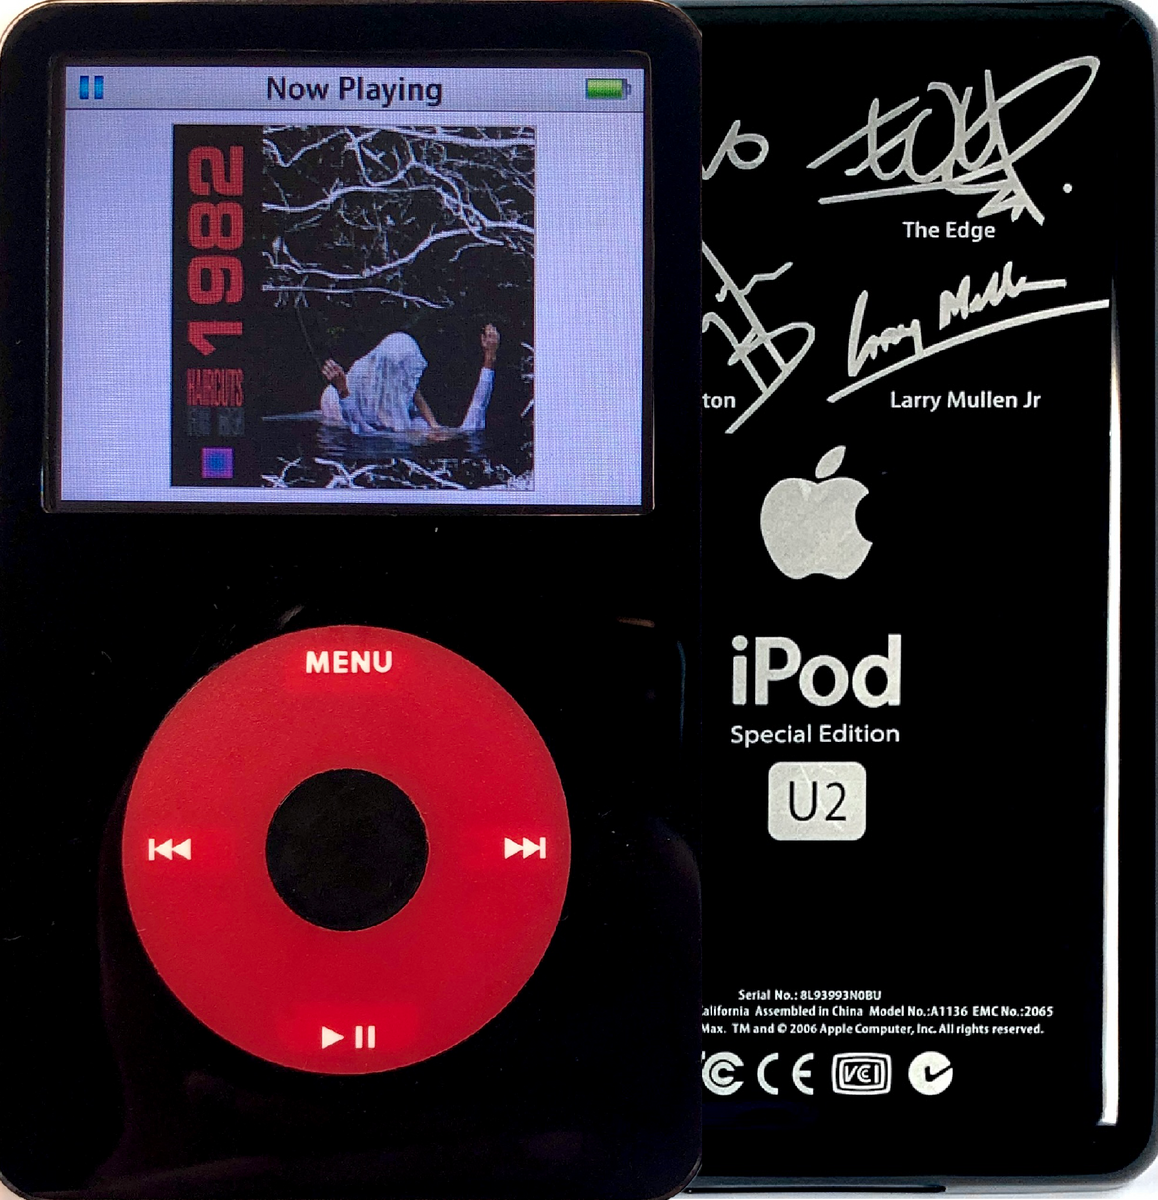 iPod U2 Special Edition (M9787J/A)【即購入可】 - ポータブルプレーヤー